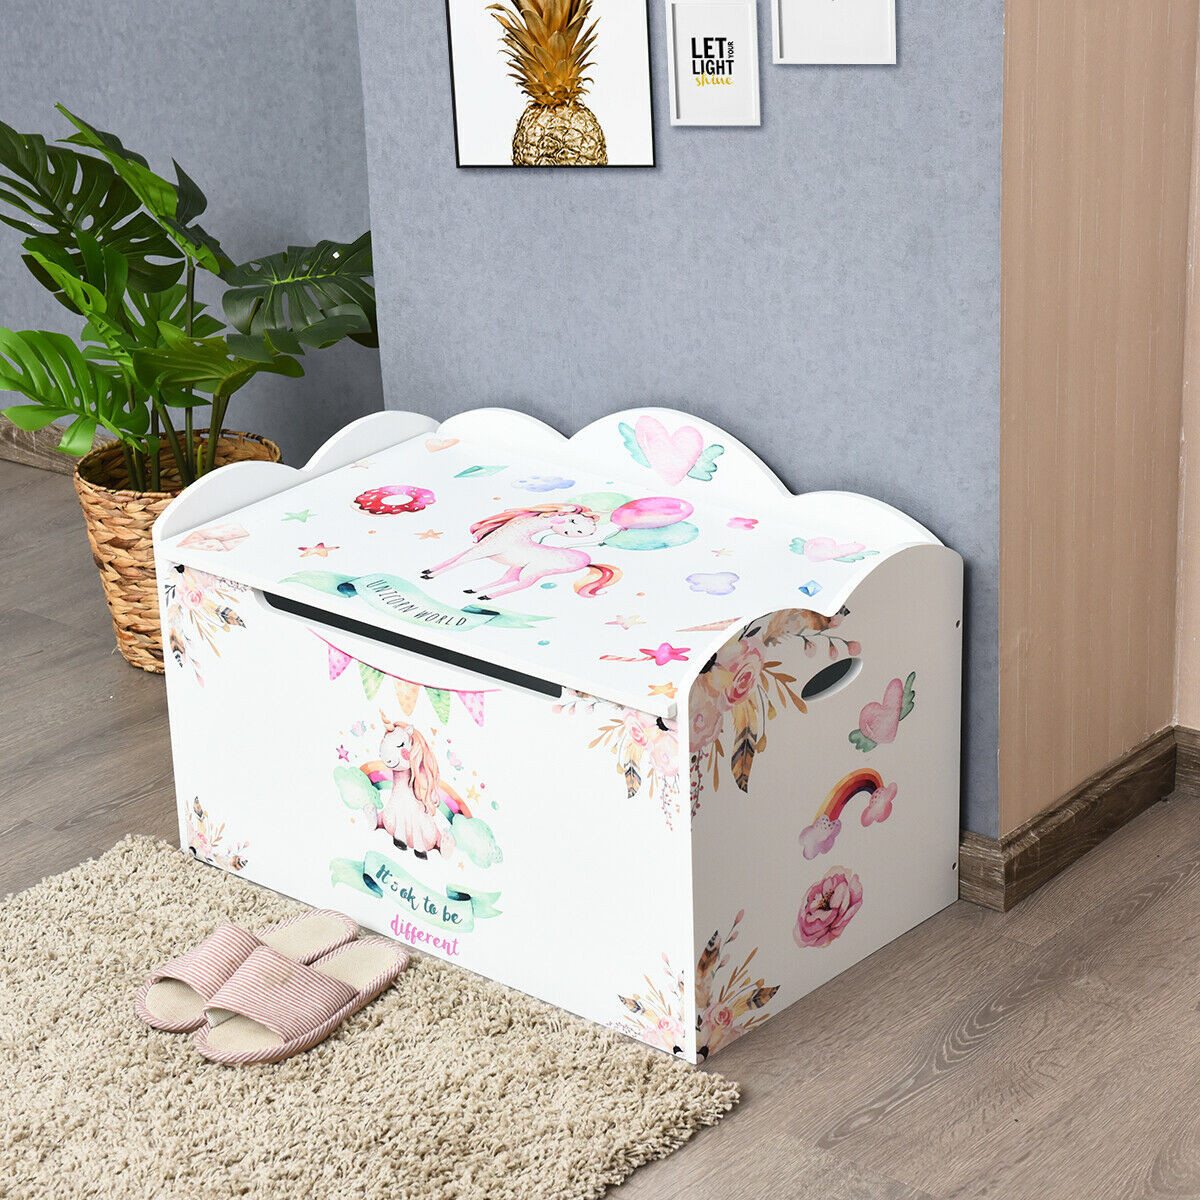 Wooden Toy Box Storage With Seating Bench For Kids